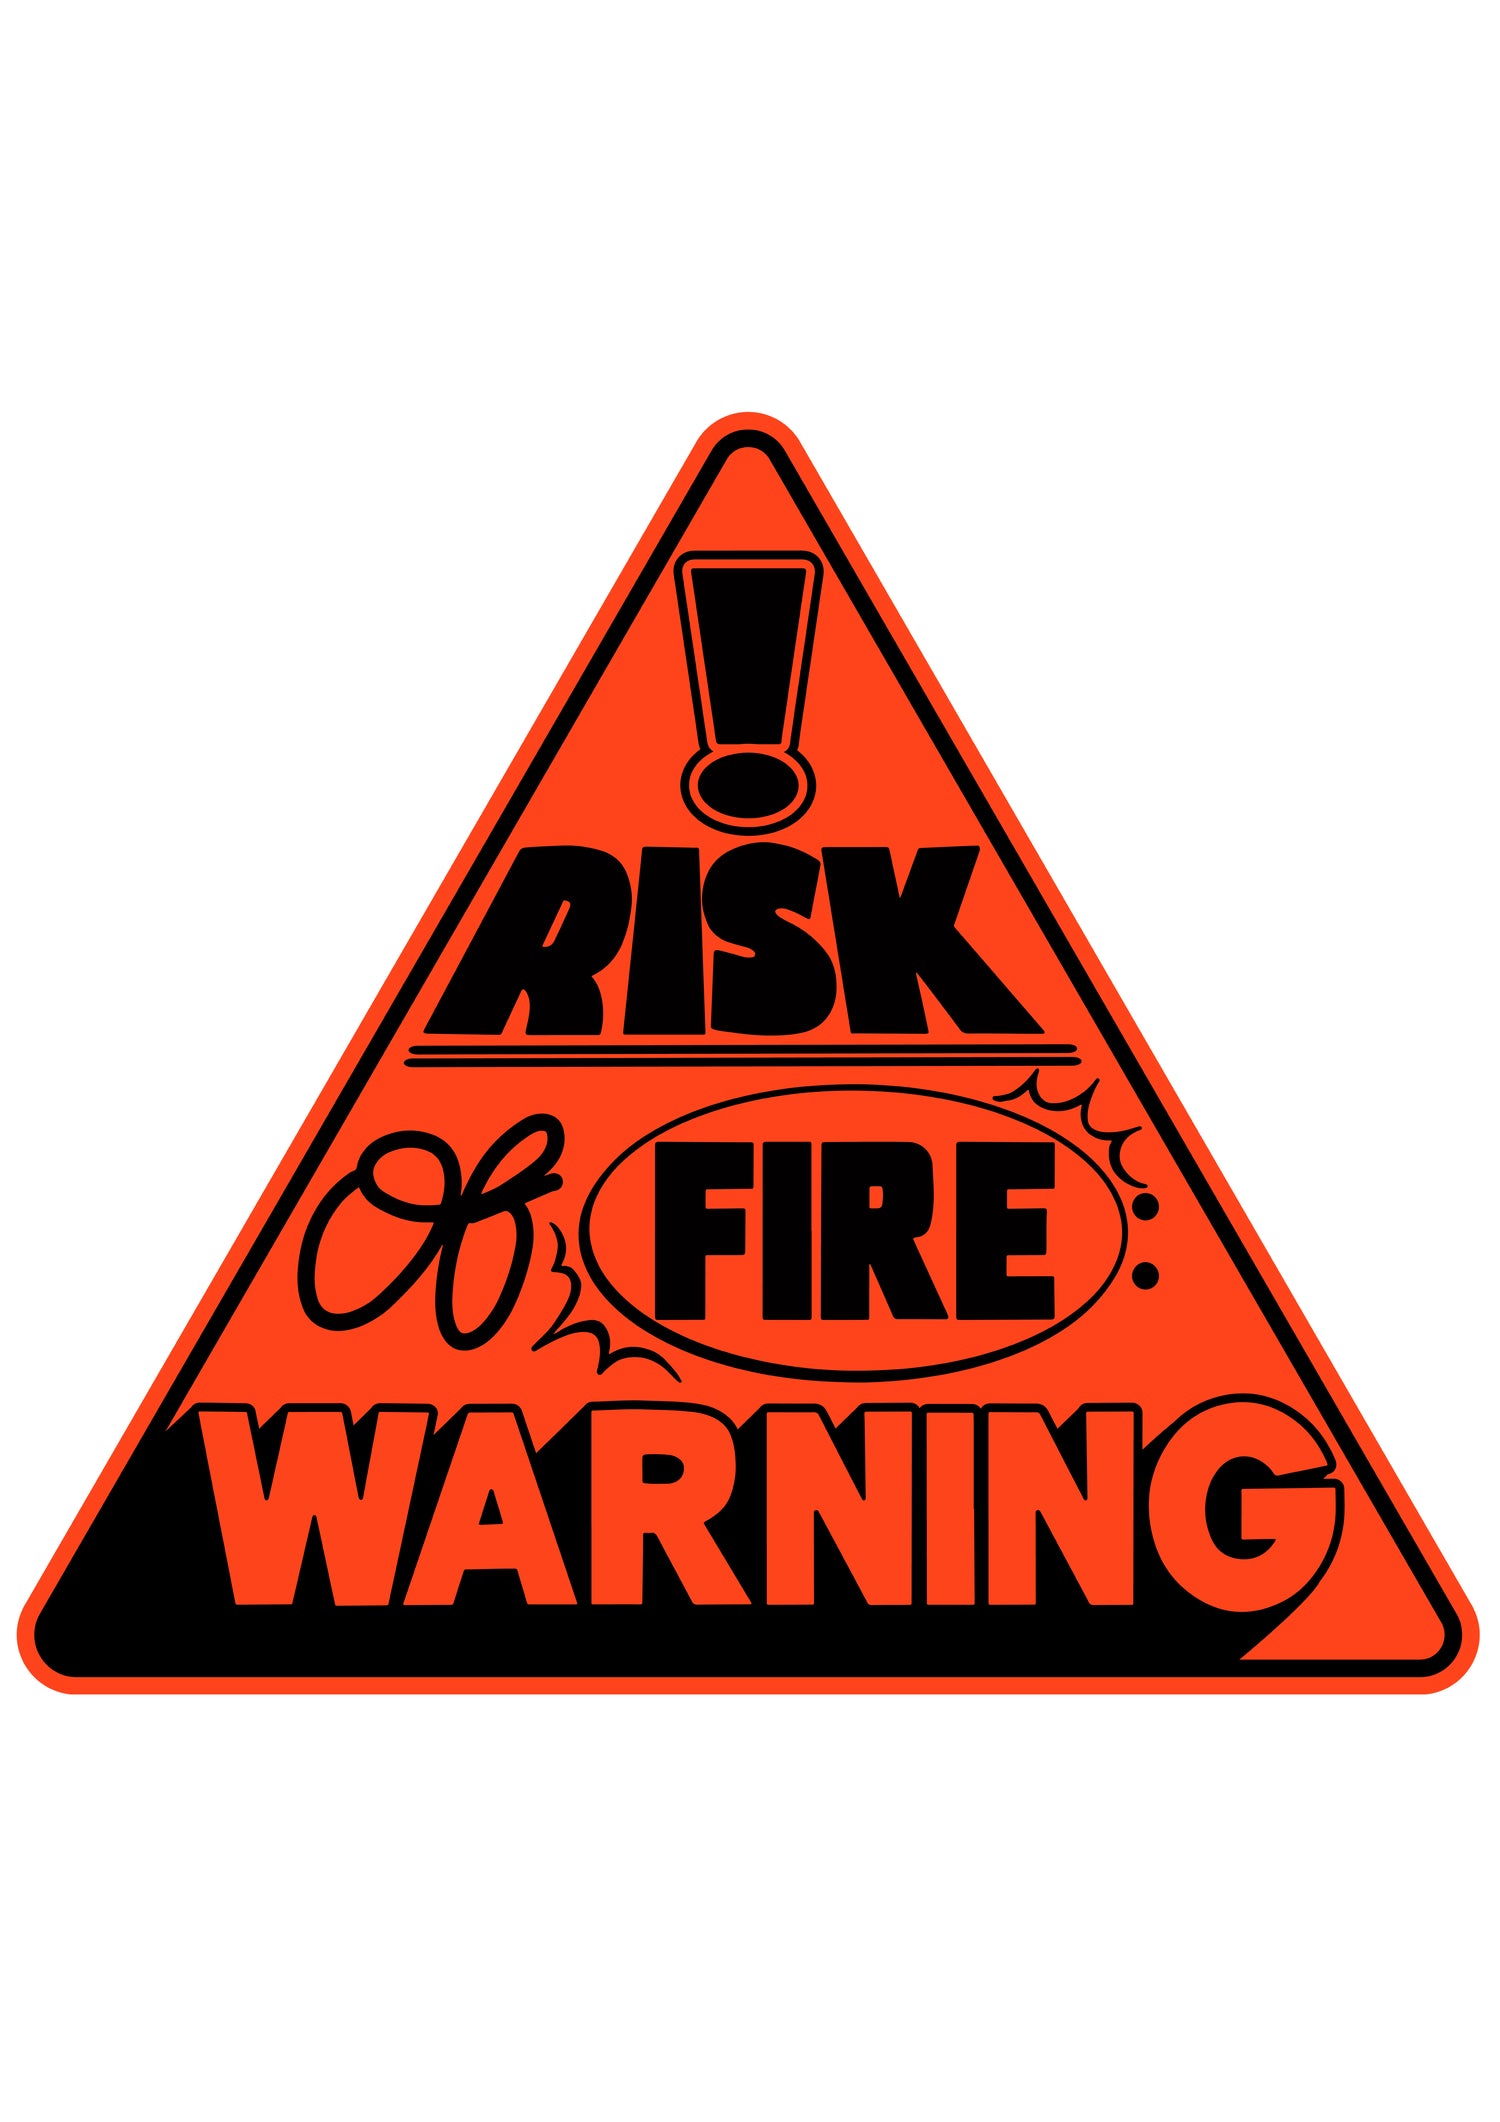 Warning: Risk of Fire Pictograms